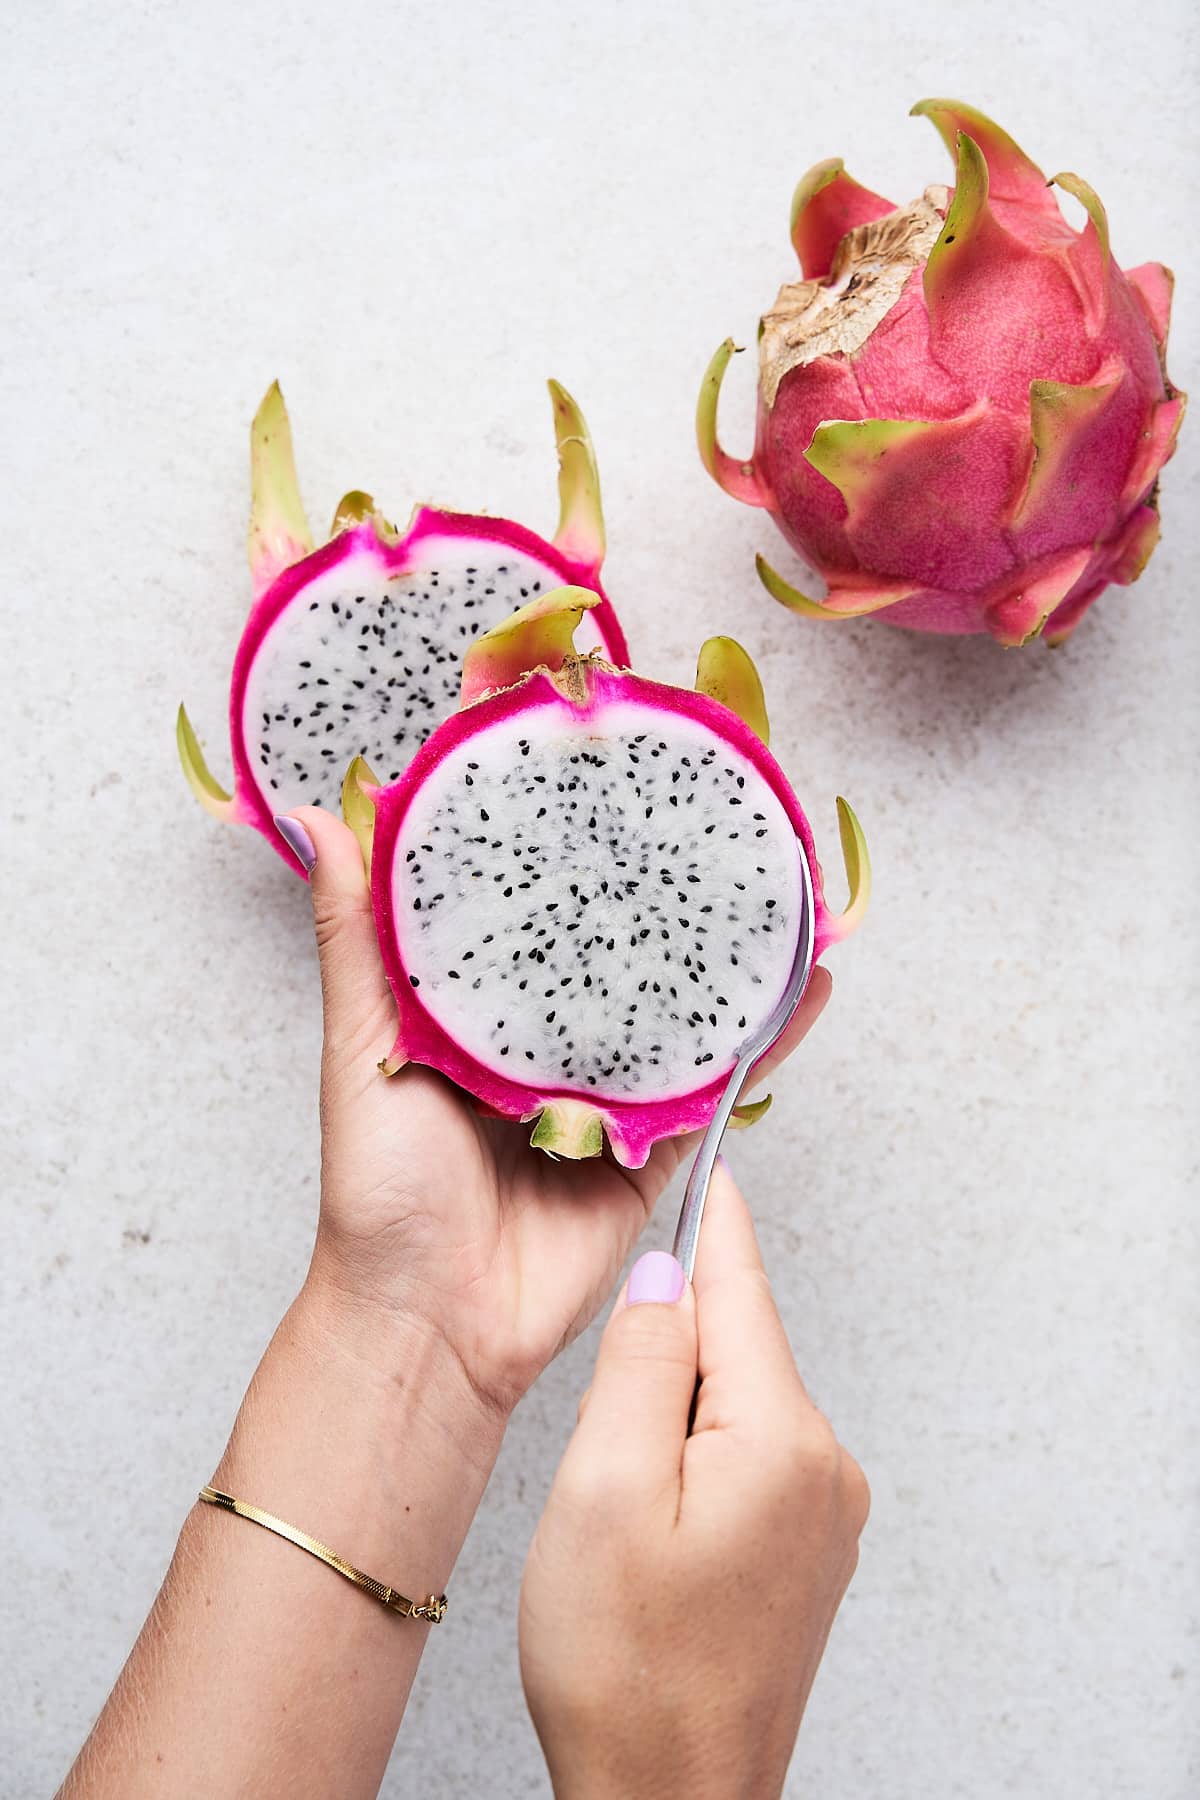 Scooping the flesh out of a dragonfruit